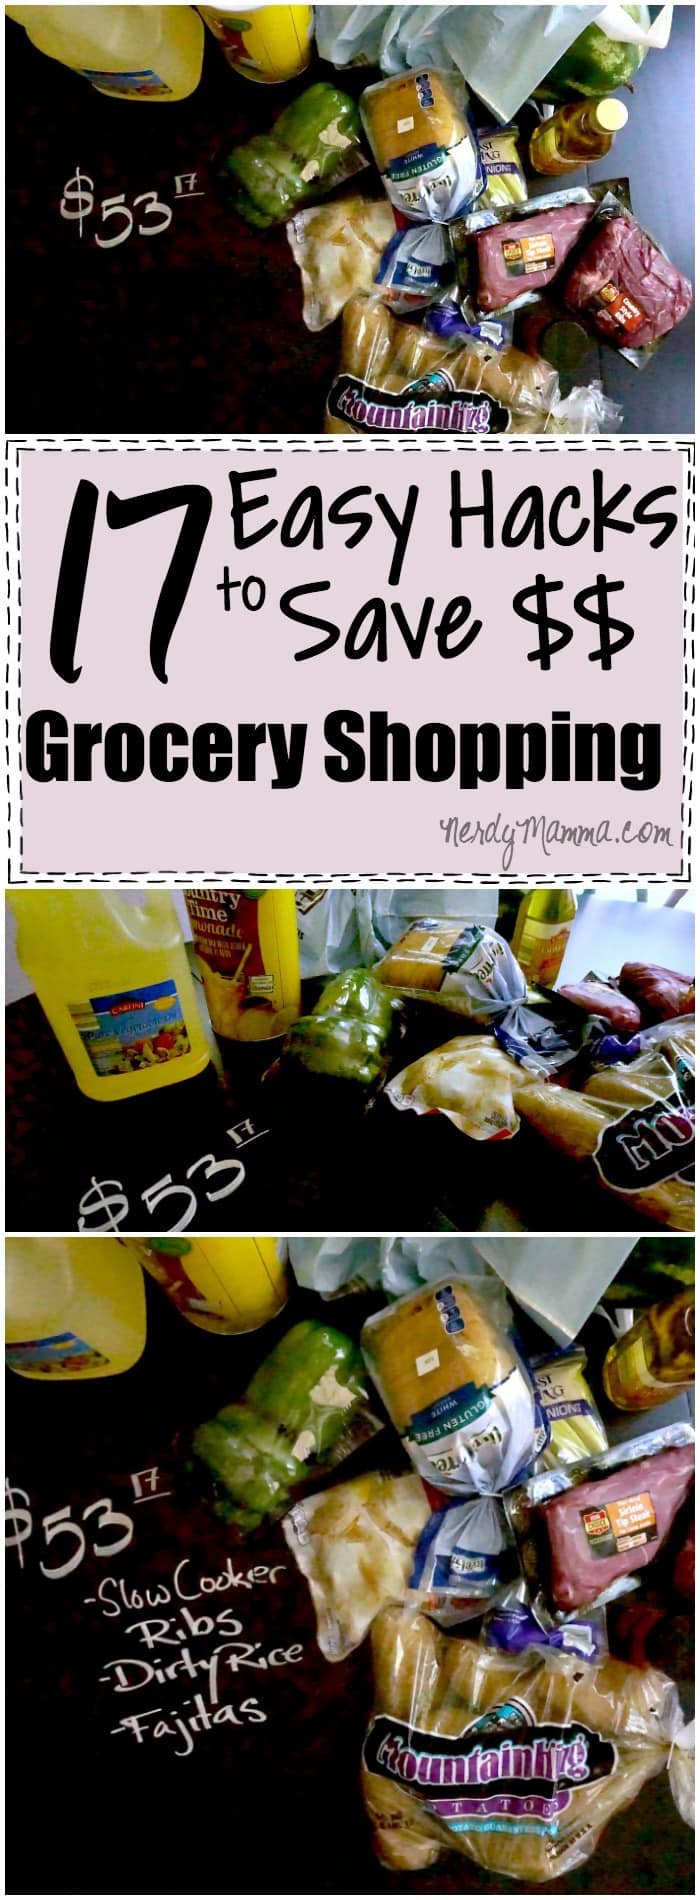 These 17 easy hacks for saving money when you're grocery shopping Brilliant. Just brilliant.